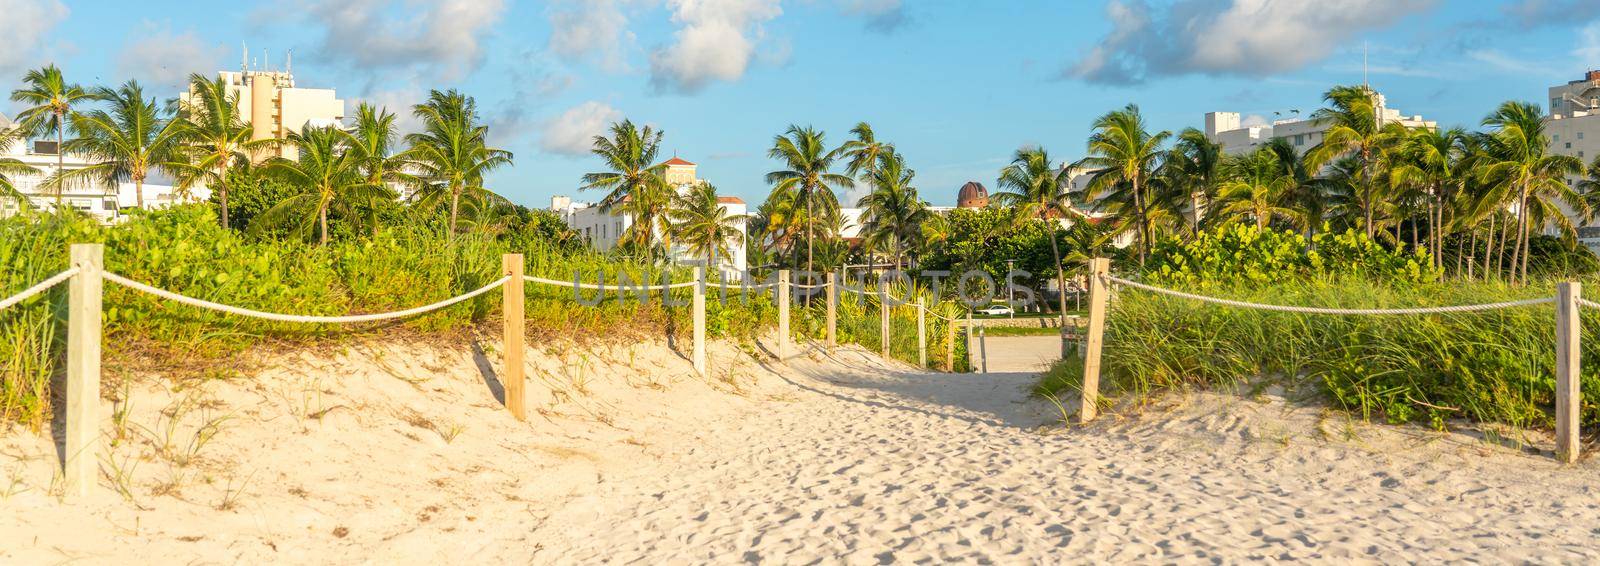 Pathway to the beach in Miami Florida with grass and ocean background